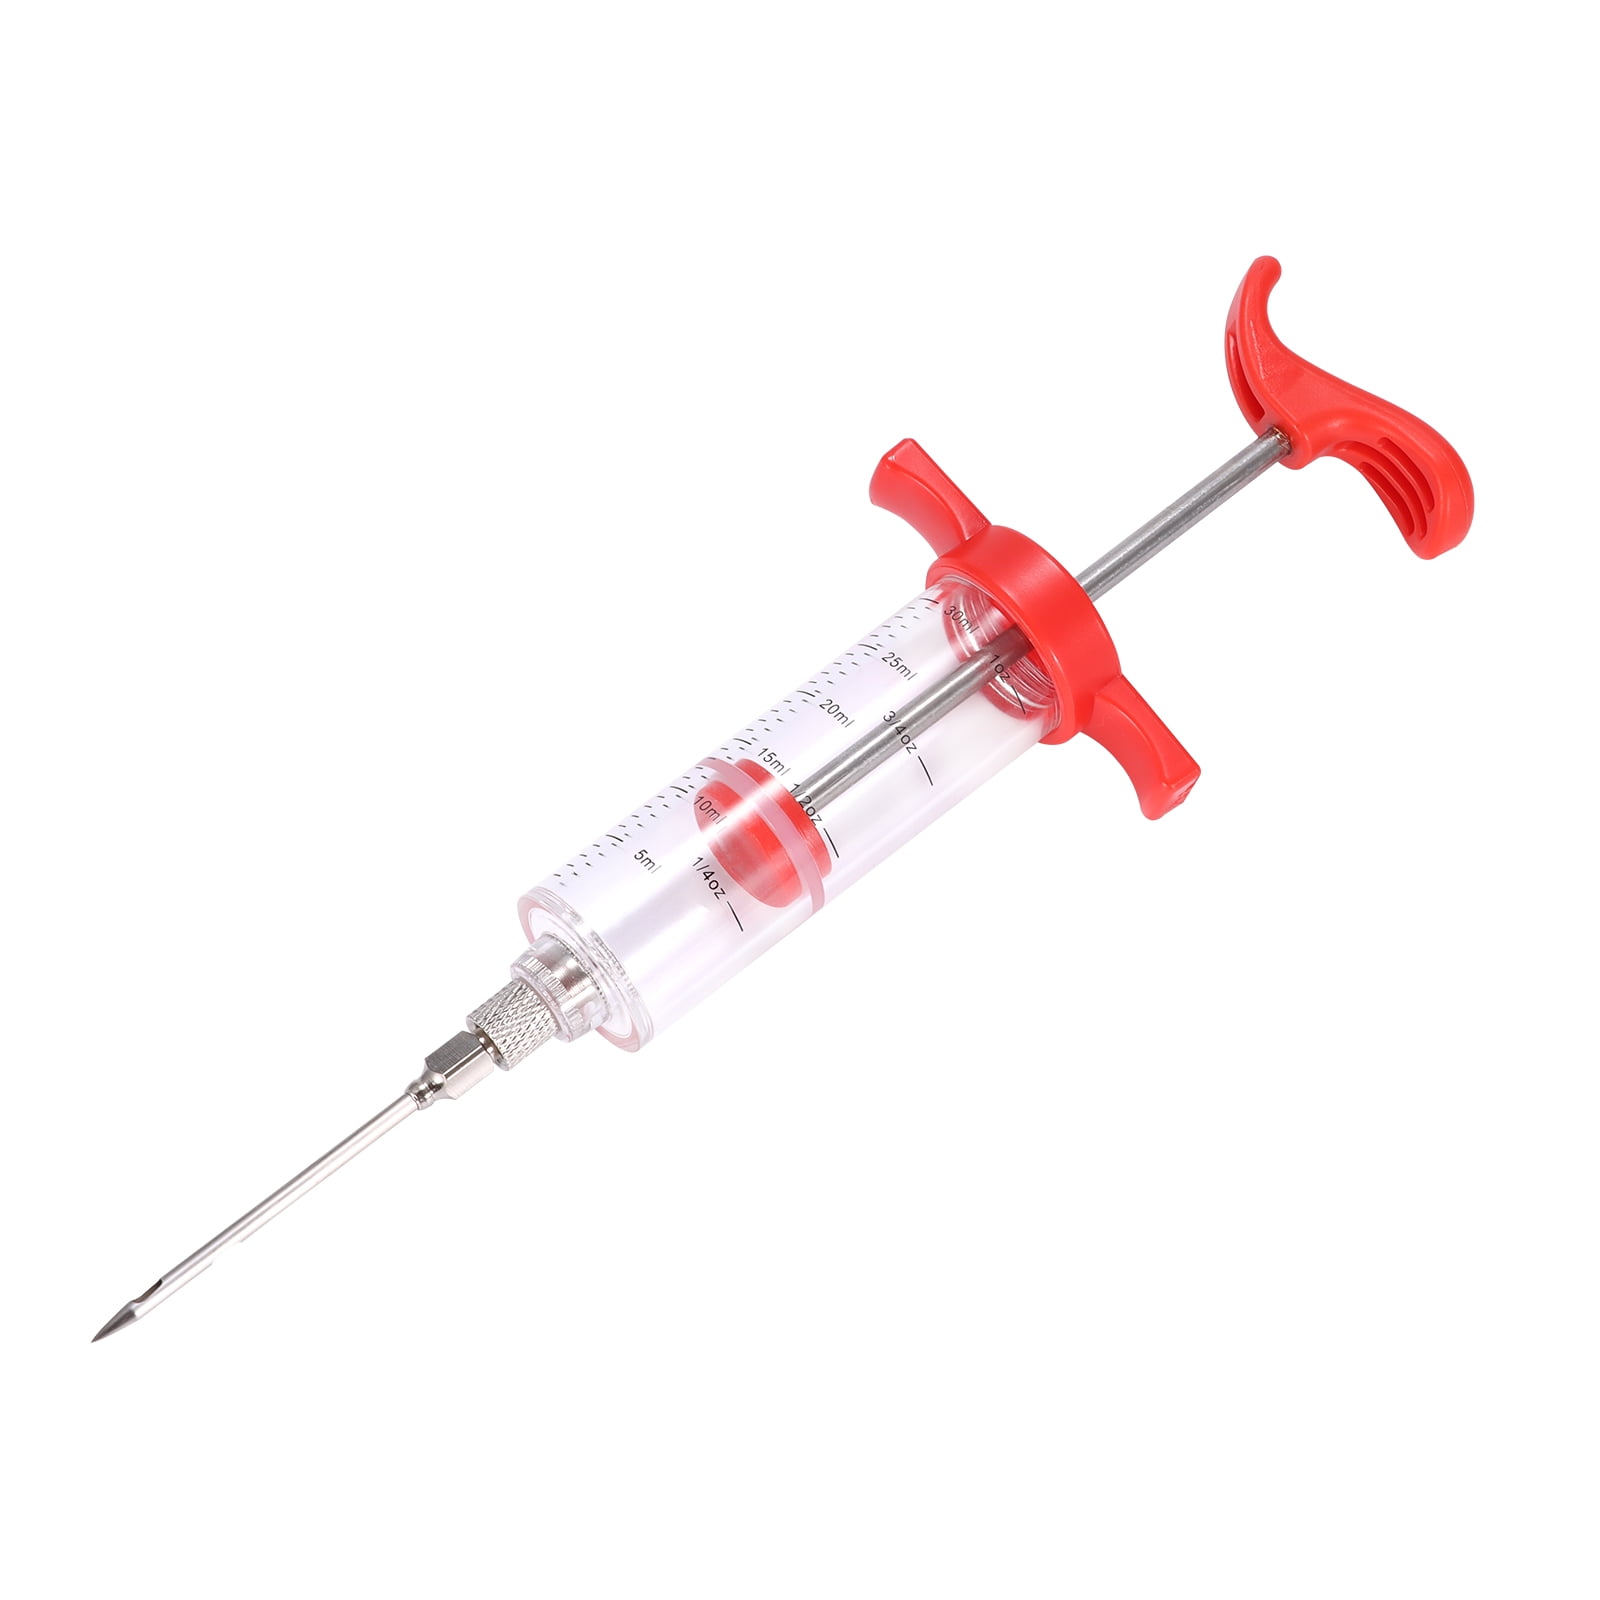 Red with 2 Marinade Needles Cross Land Plastic Marinade Injector Syringe with Screw-on Meat Needle for BBQ Grill 3 Extra O-Rings & 1 Cleaning Brush 1-oz 